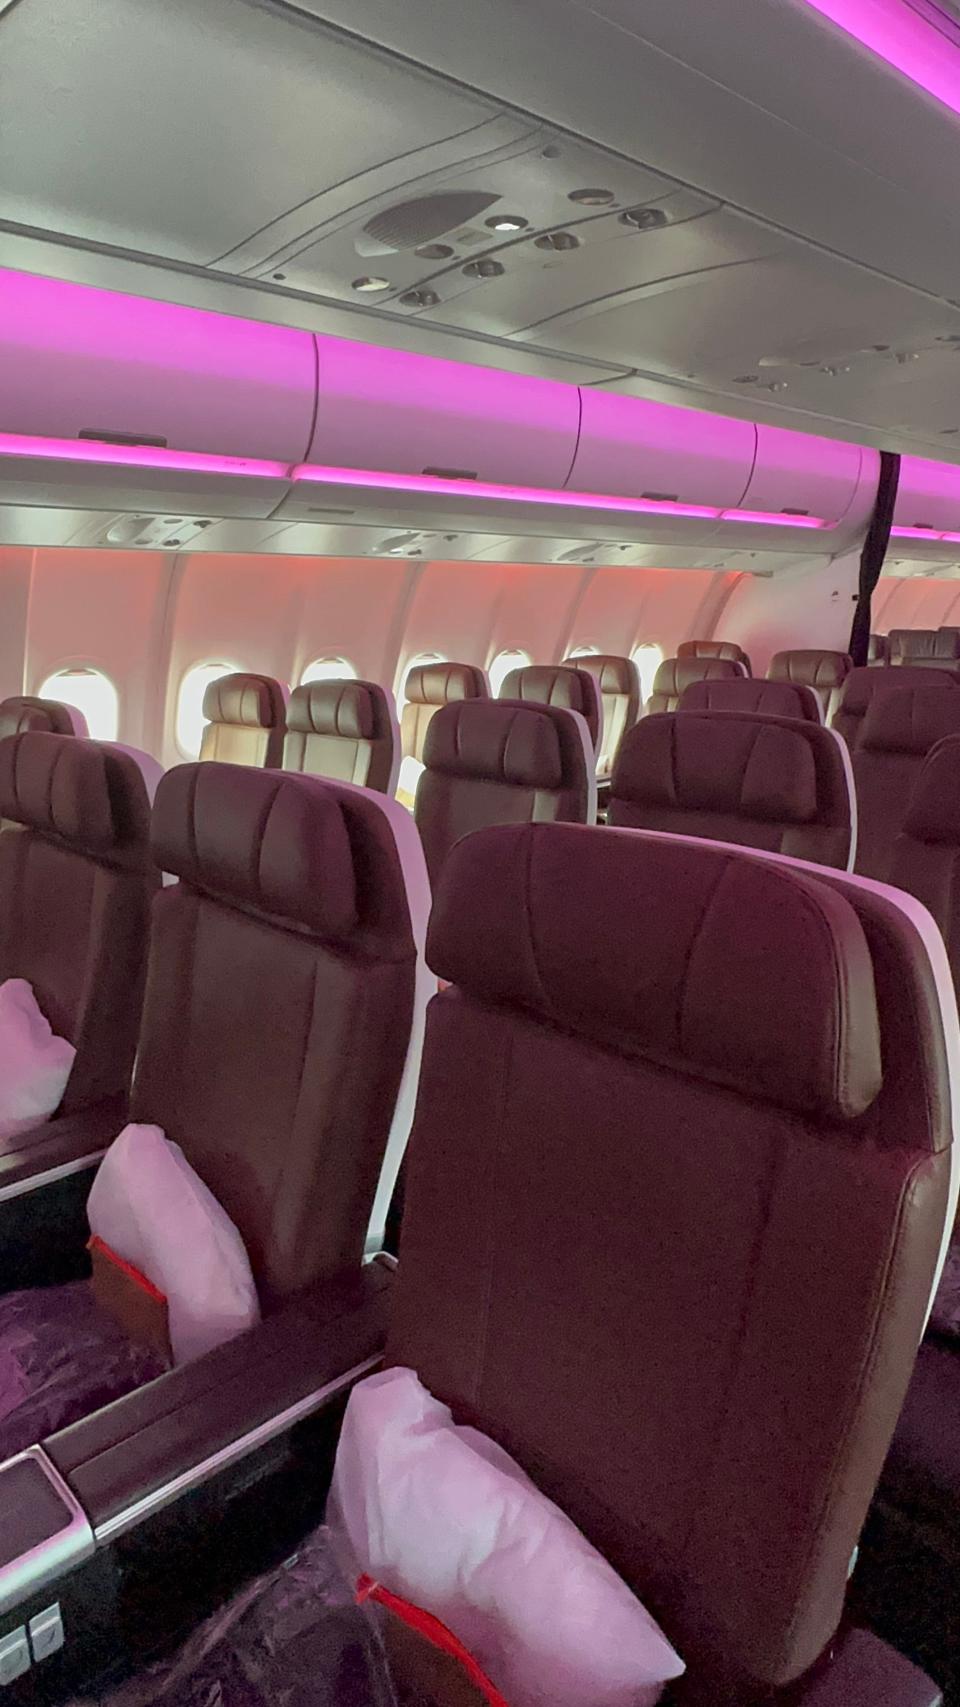 Premium Class on Virgin Atlantic, Dan Koday, " I was one of the first people to see Virgin Atlantic's newest aircraft that will fly between NYC and London."